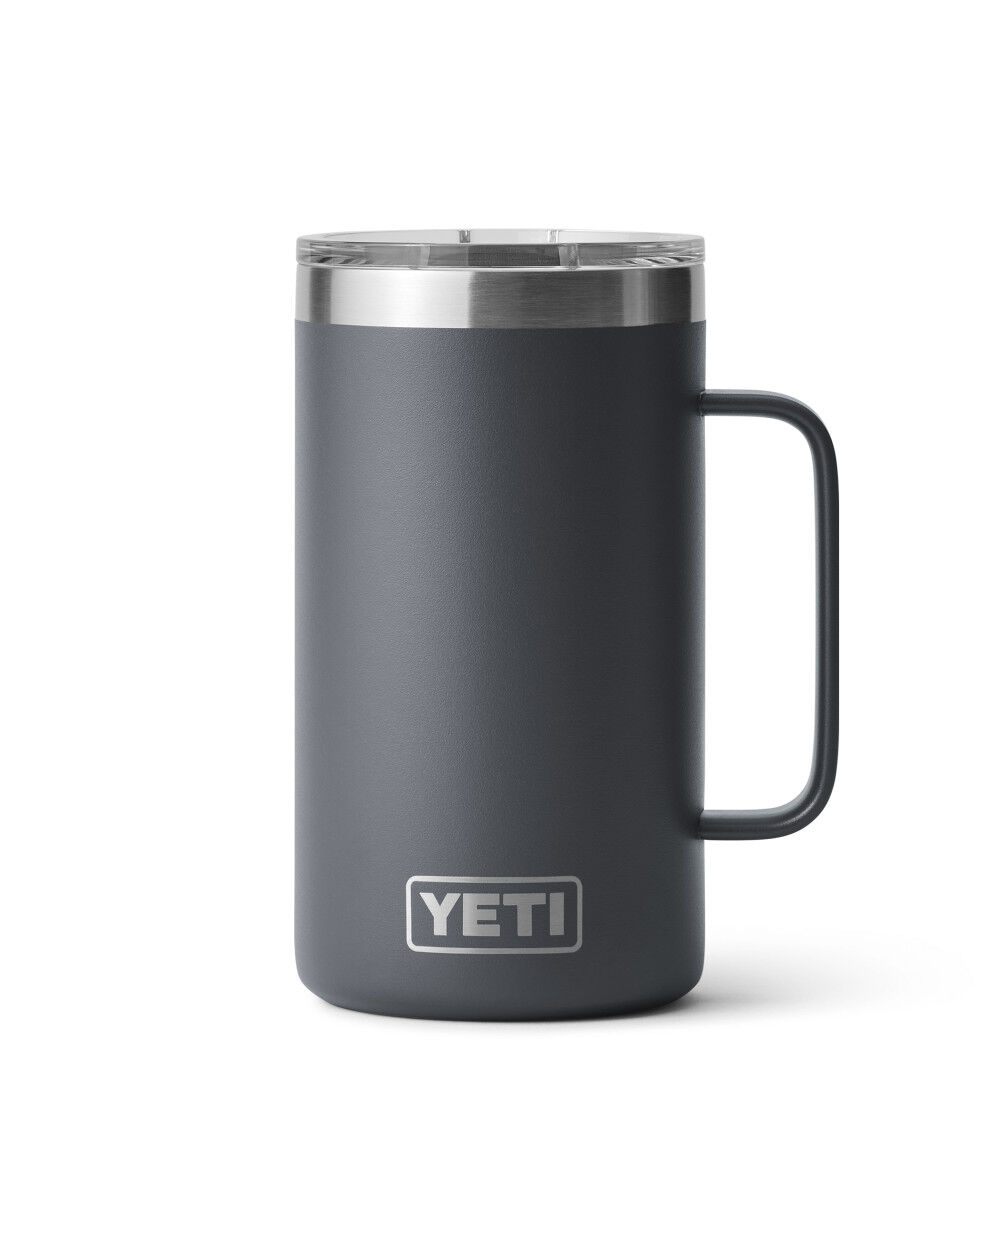 My very first 24oz mug arrived today! : r/YetiCoolers